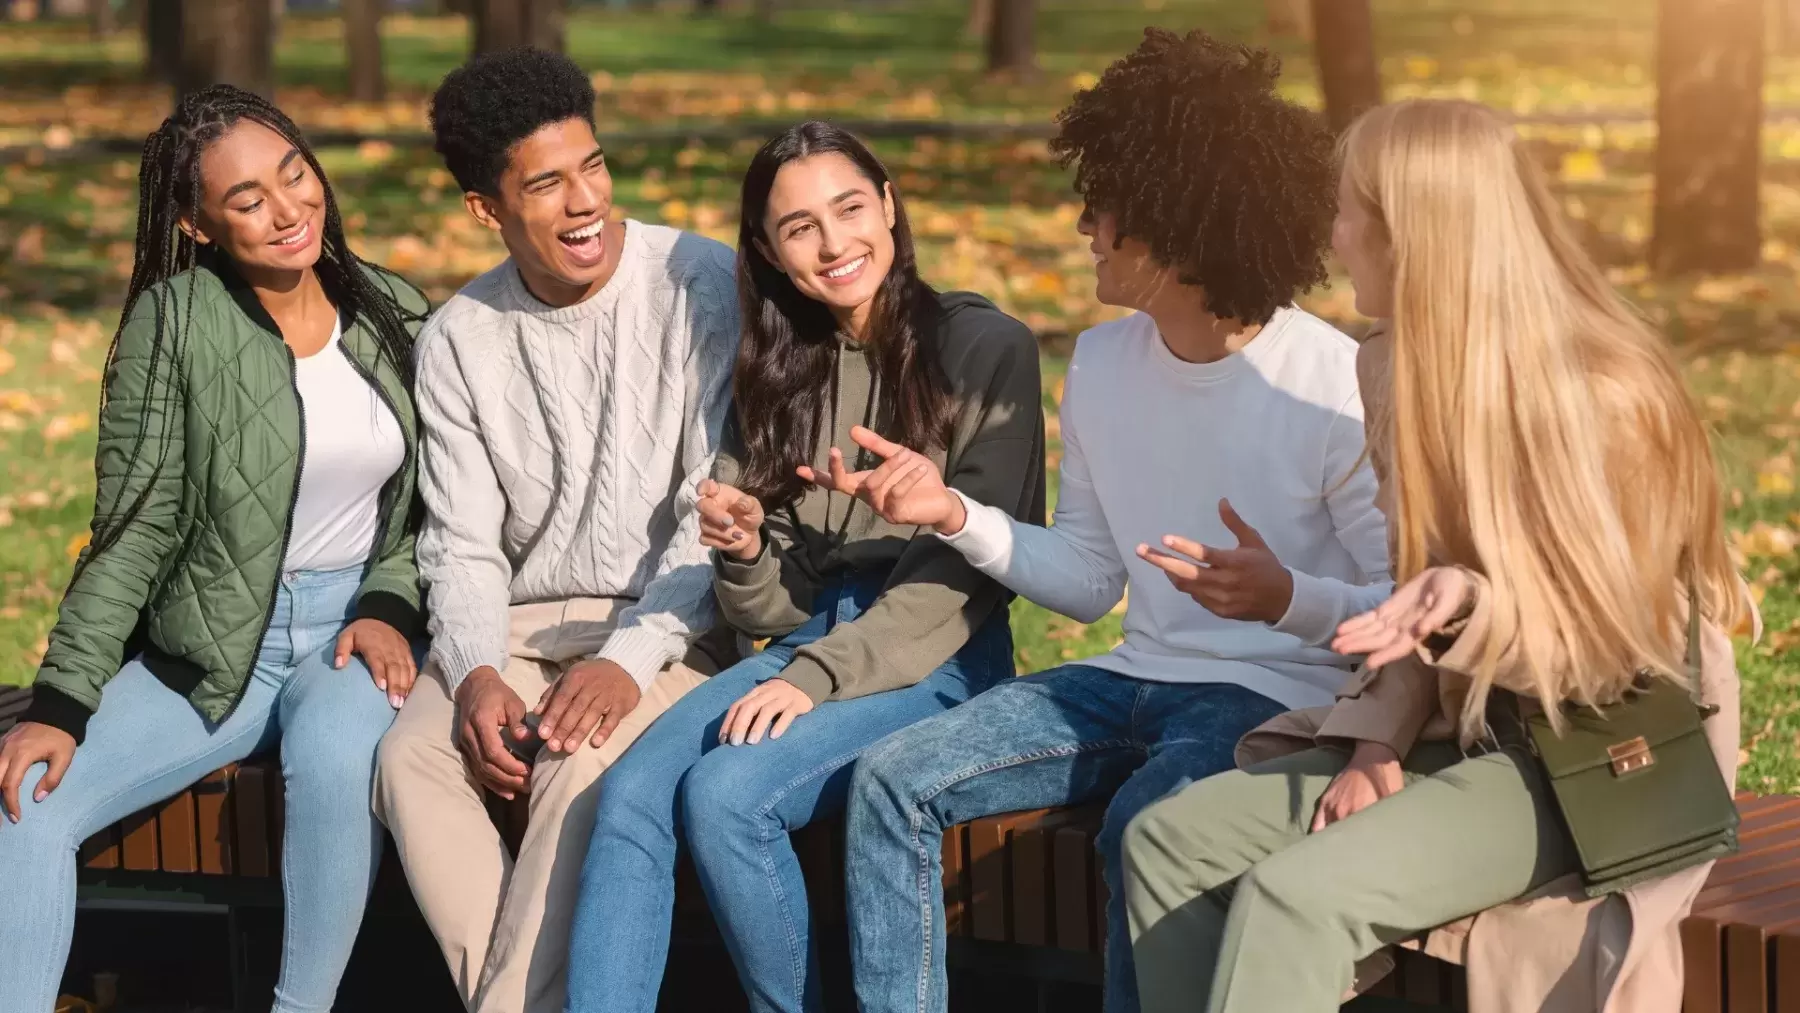 youth sit together on a bench talking animatedly and smiling